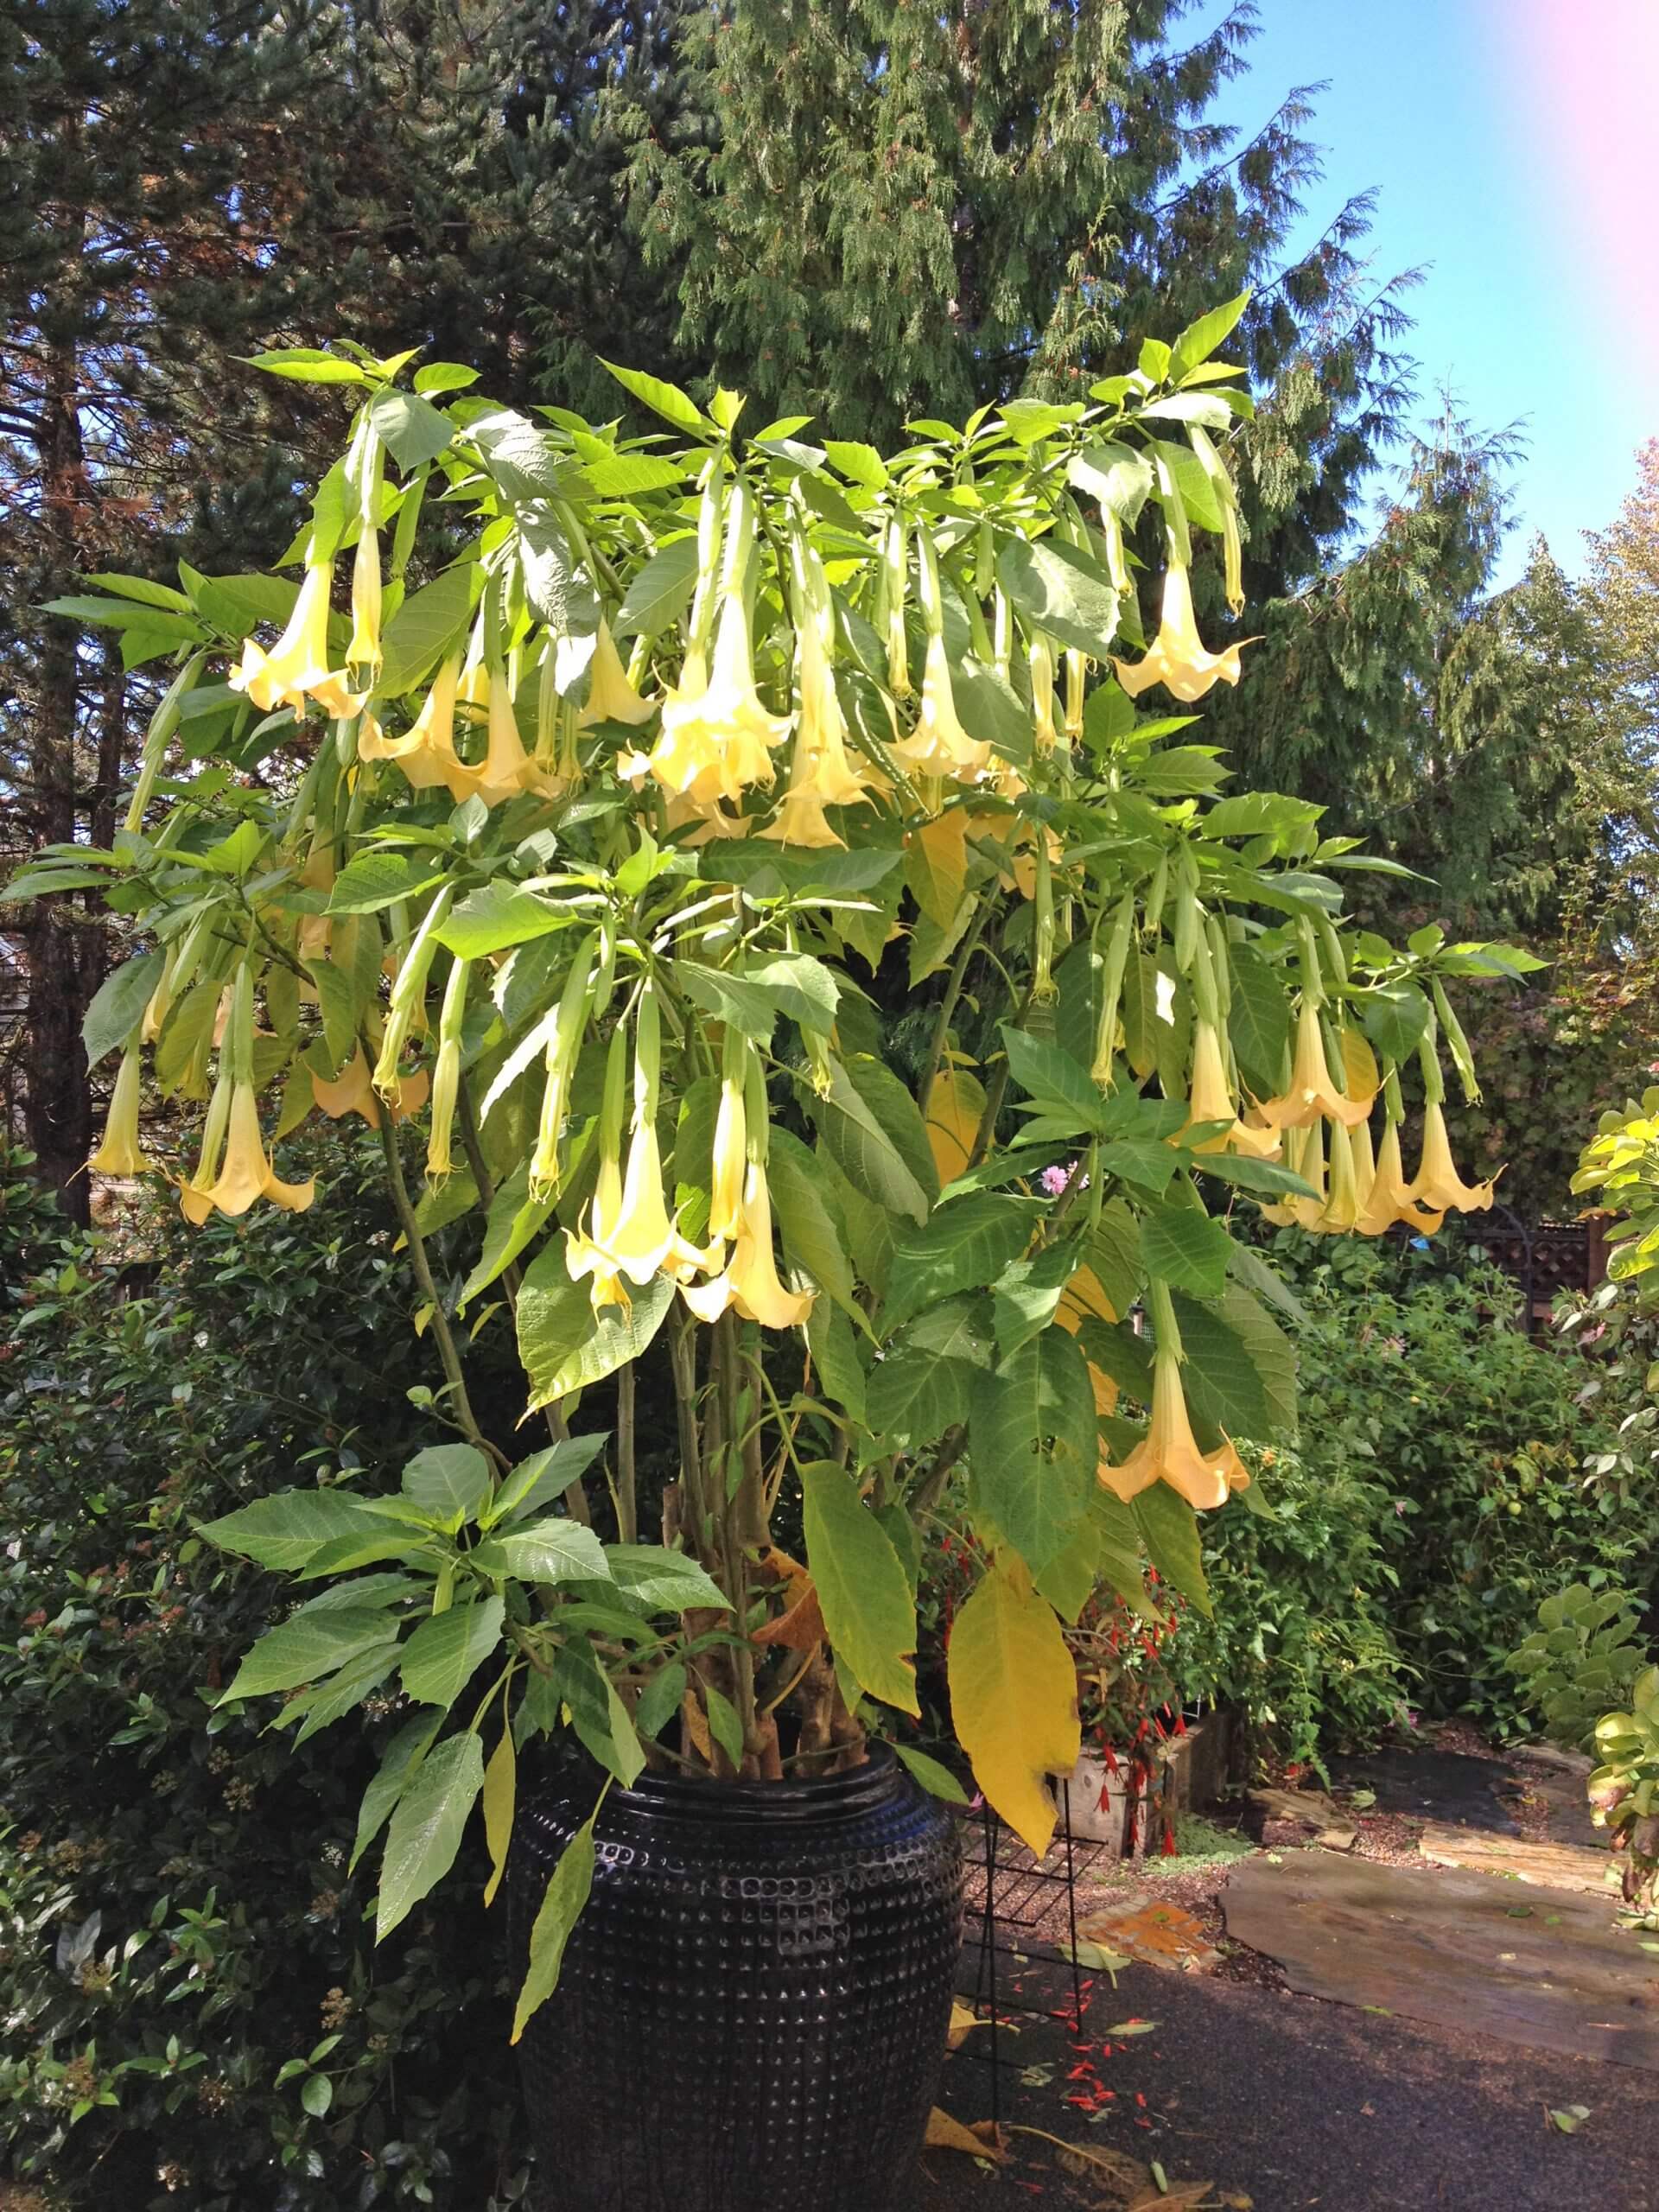 In fall, Brugmansia tends to explode into bloom before being brought indoors for winter.